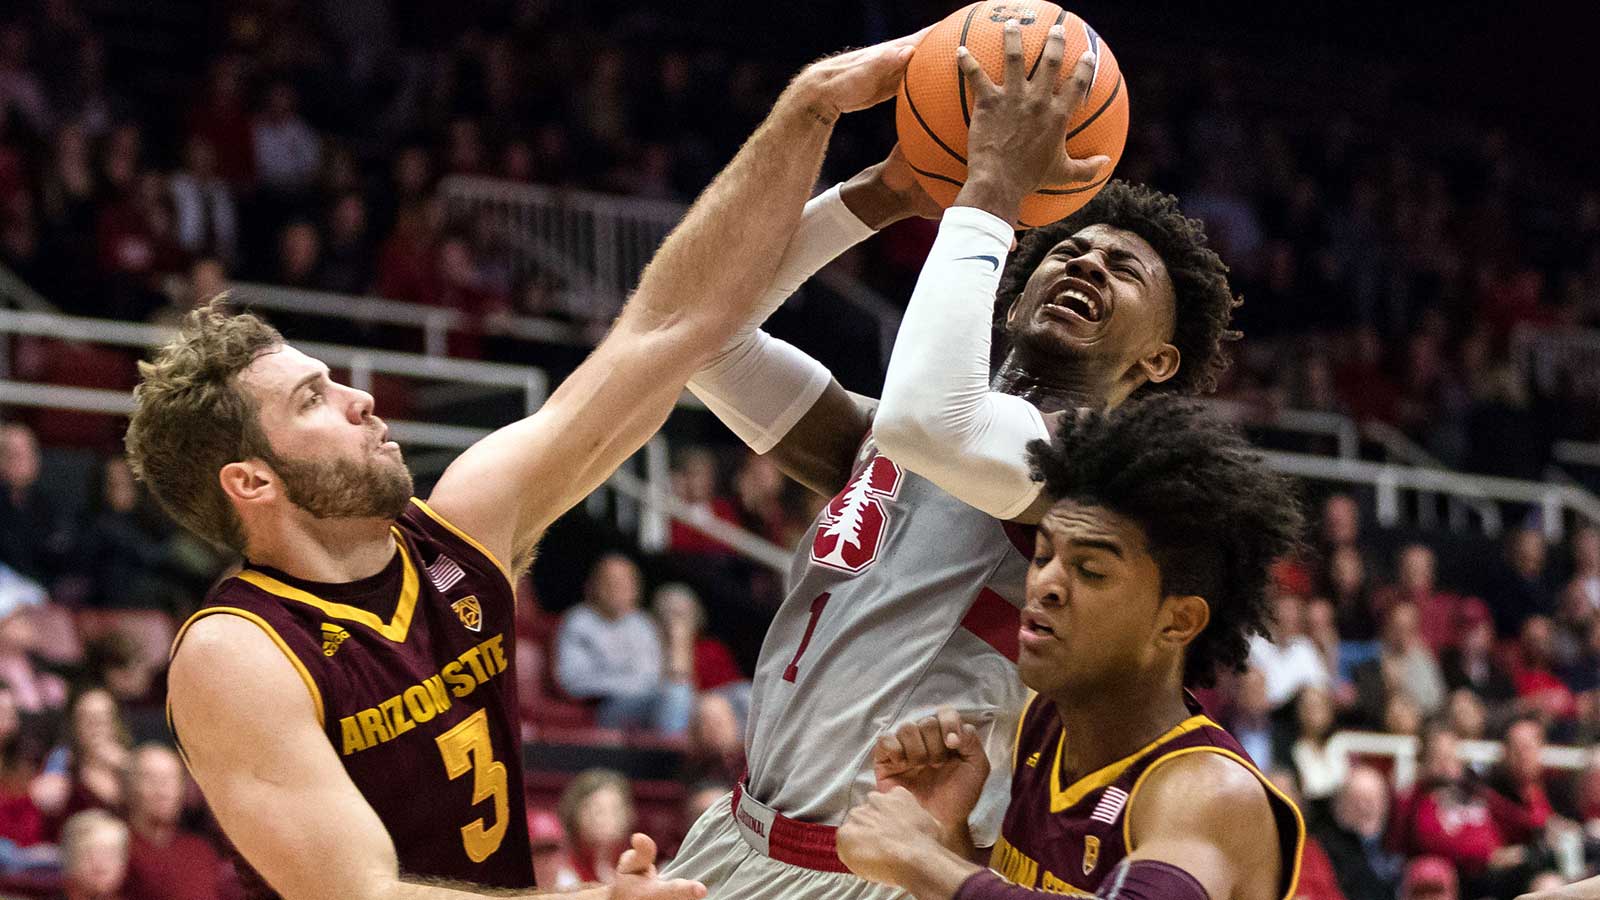 ASU falls to 2-4 in Pac-12 with loss at Stanford